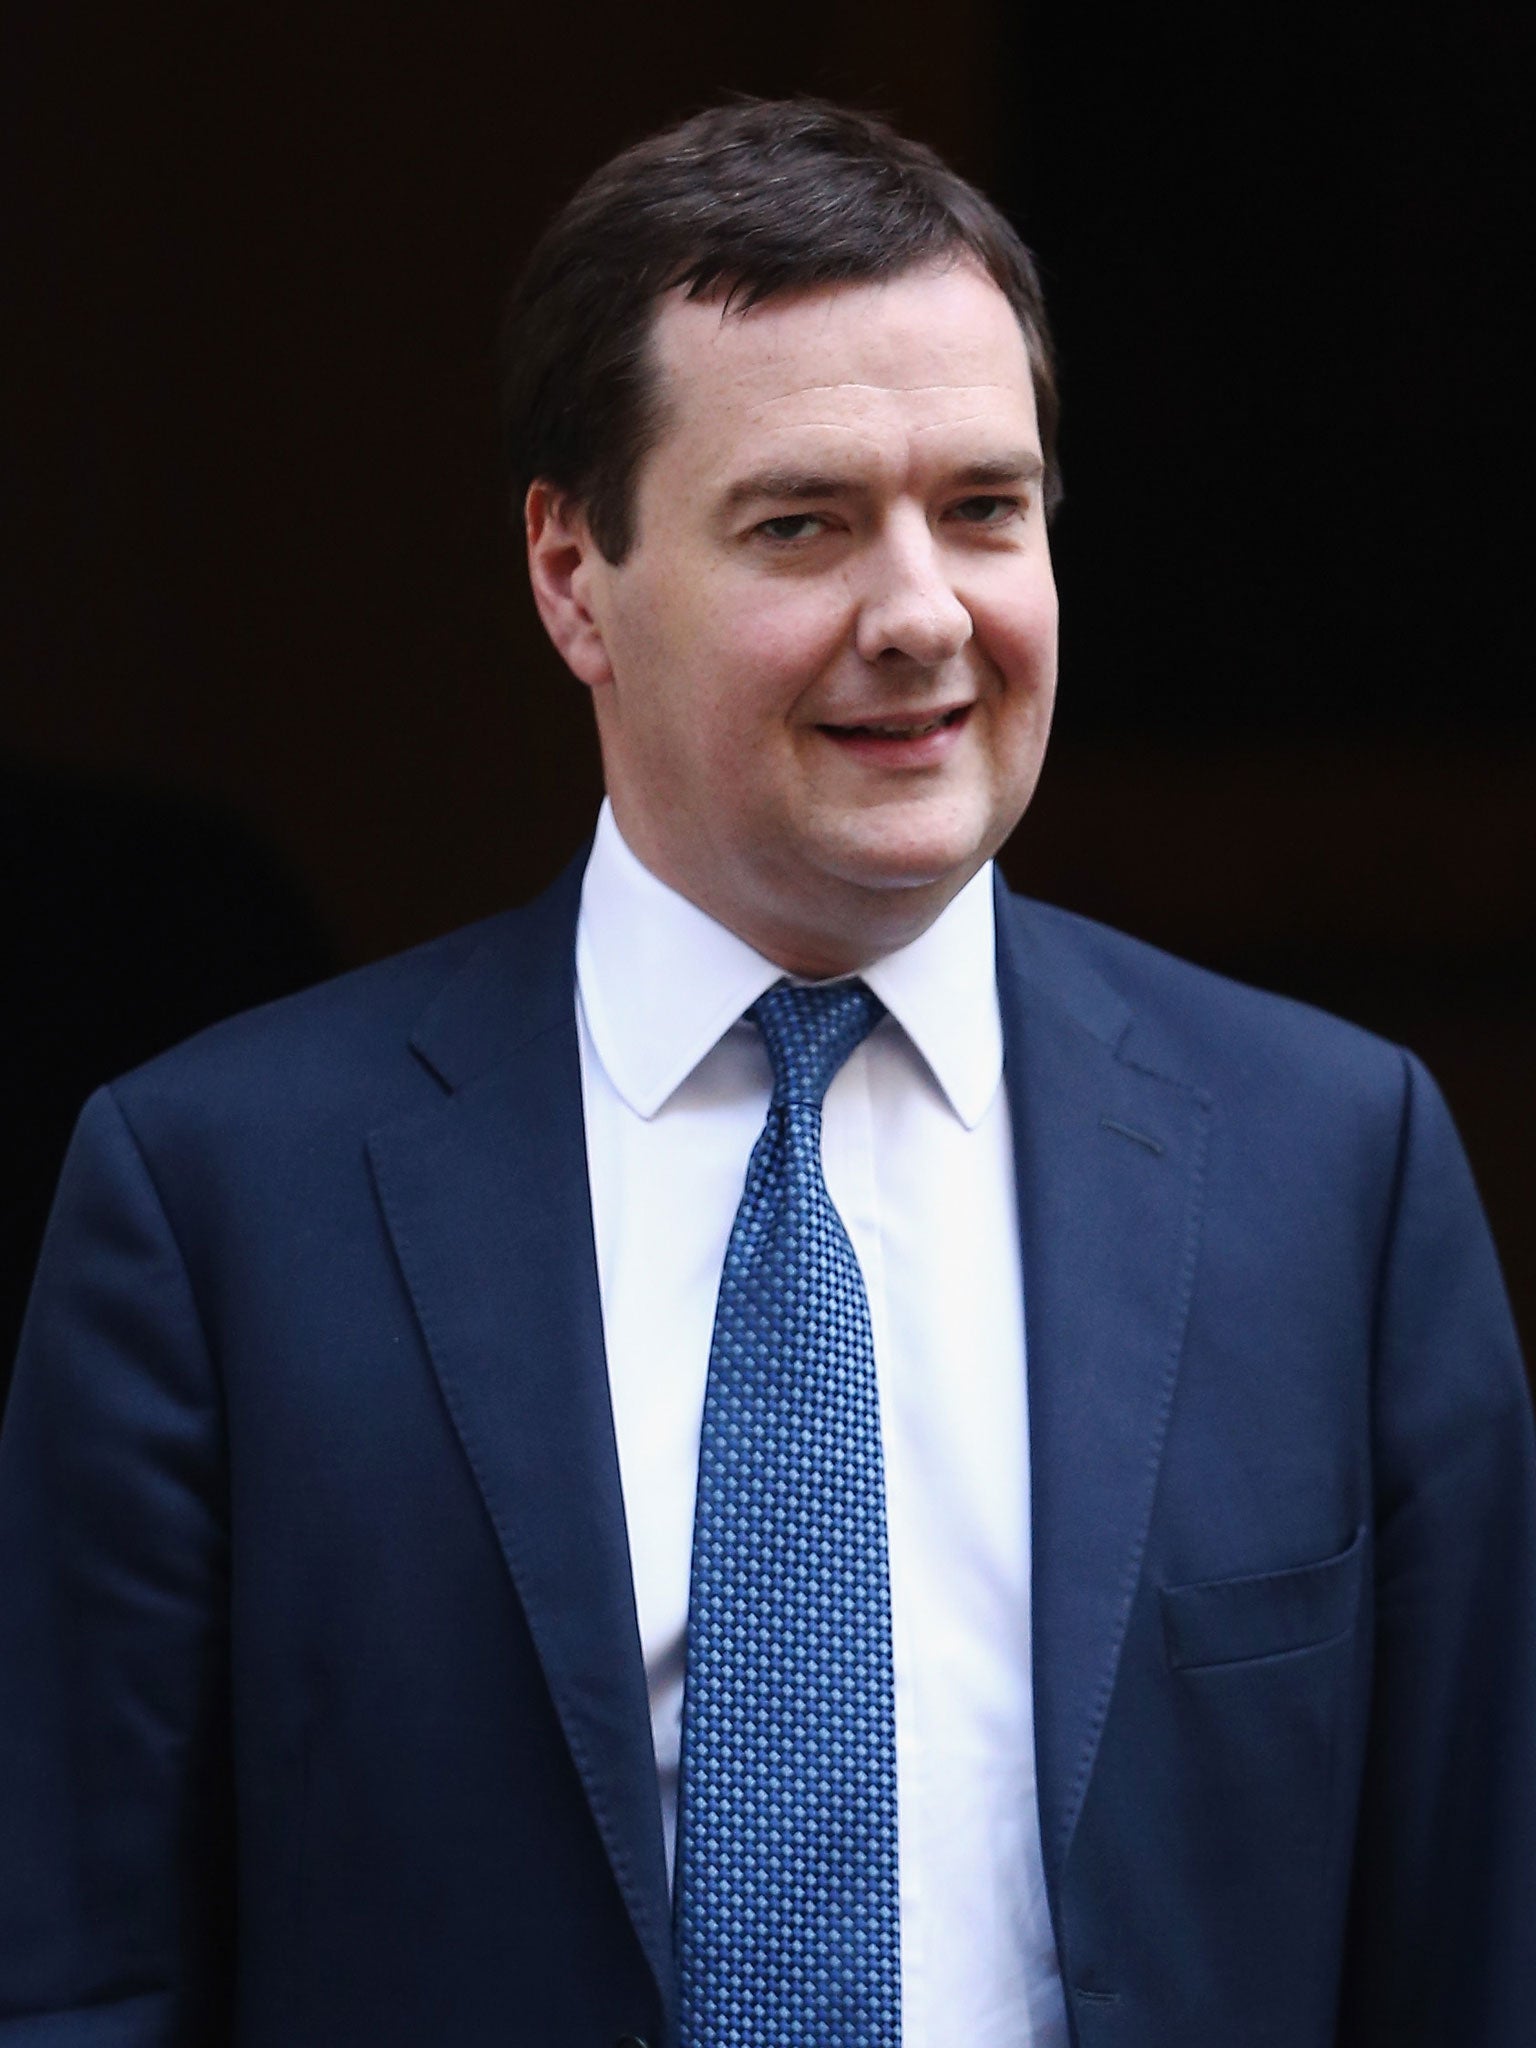 George Osborne is set to deliver his most upbeat economic assessment yet